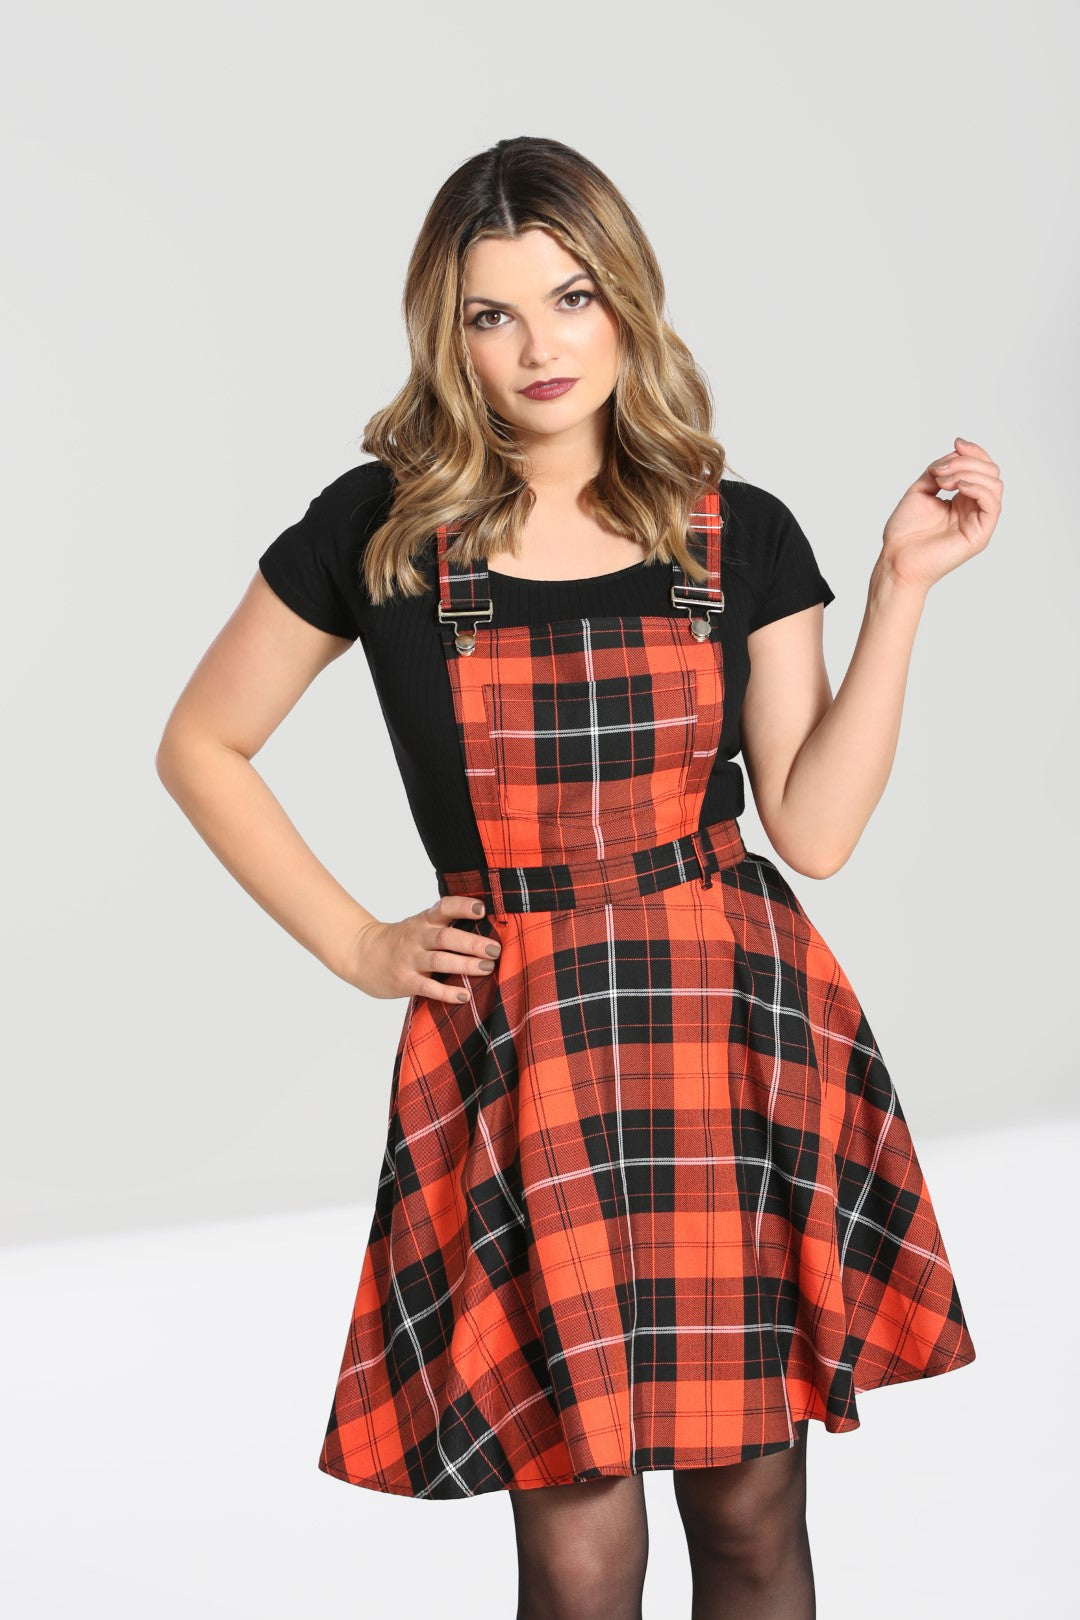 Clementine Pinafore Dress by Hell Bunny